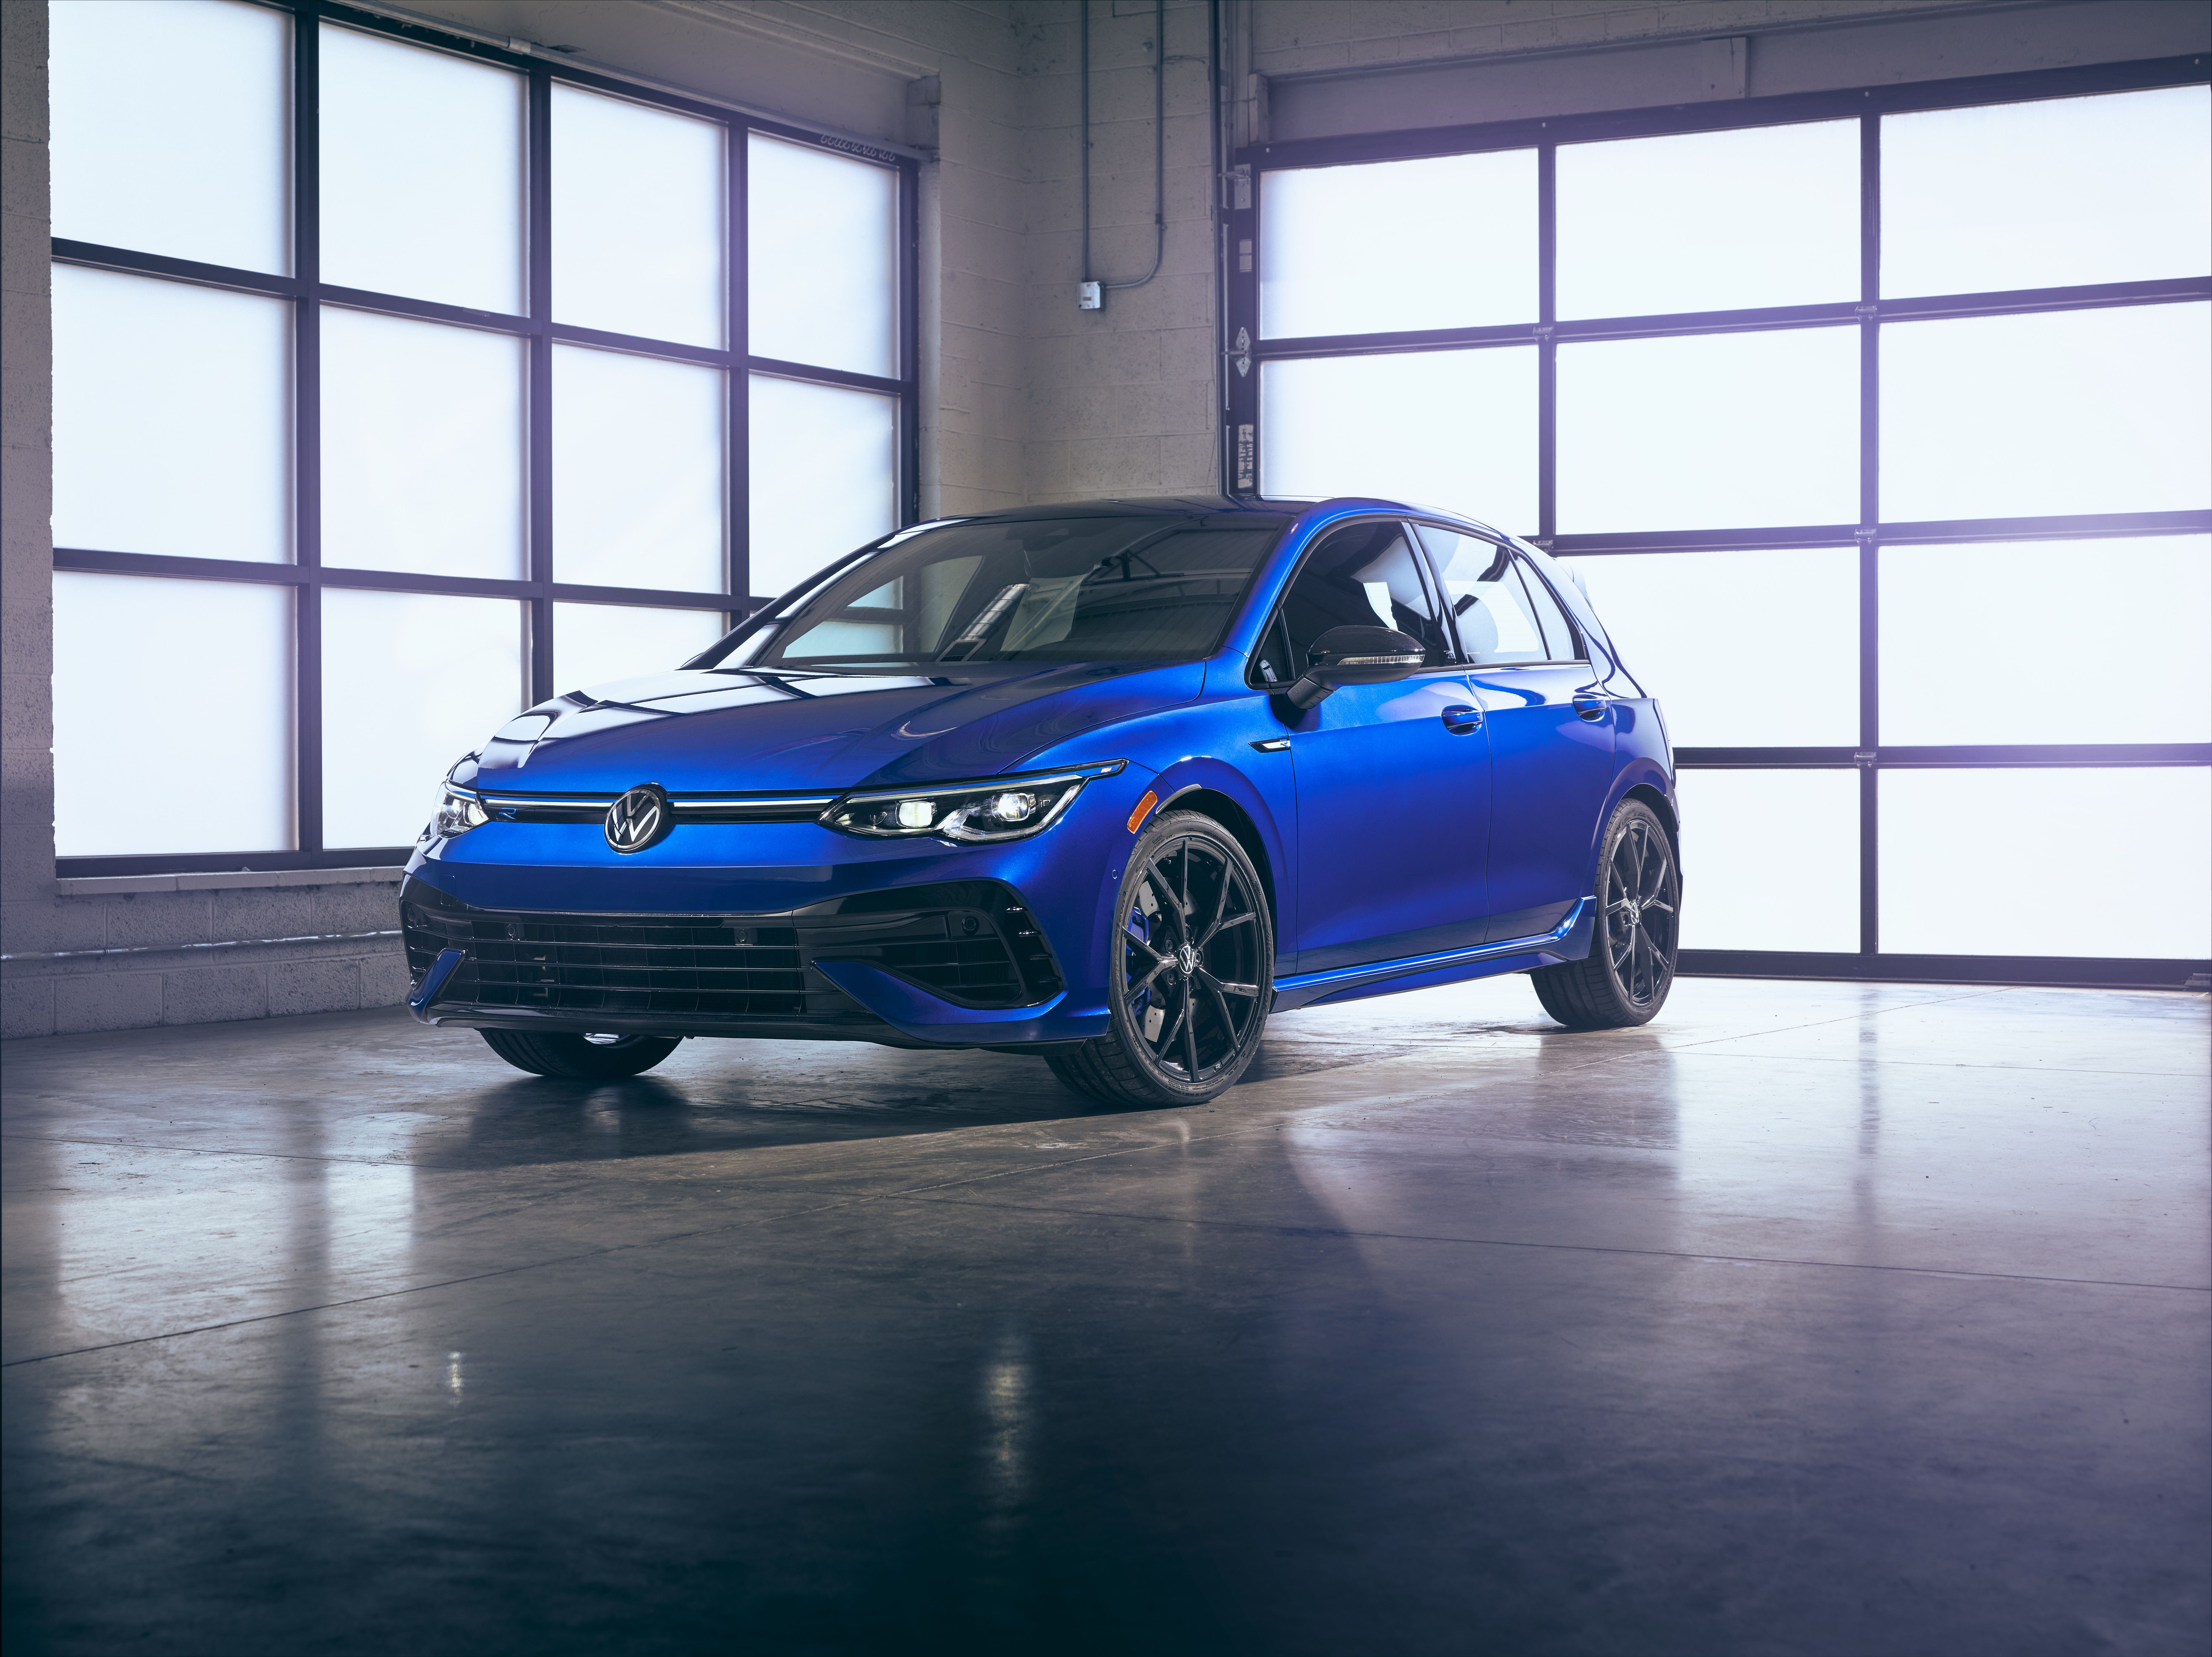 Special-edition $125,000 Volkswagen Golf R '333' sold out in eight minutes  - Drive